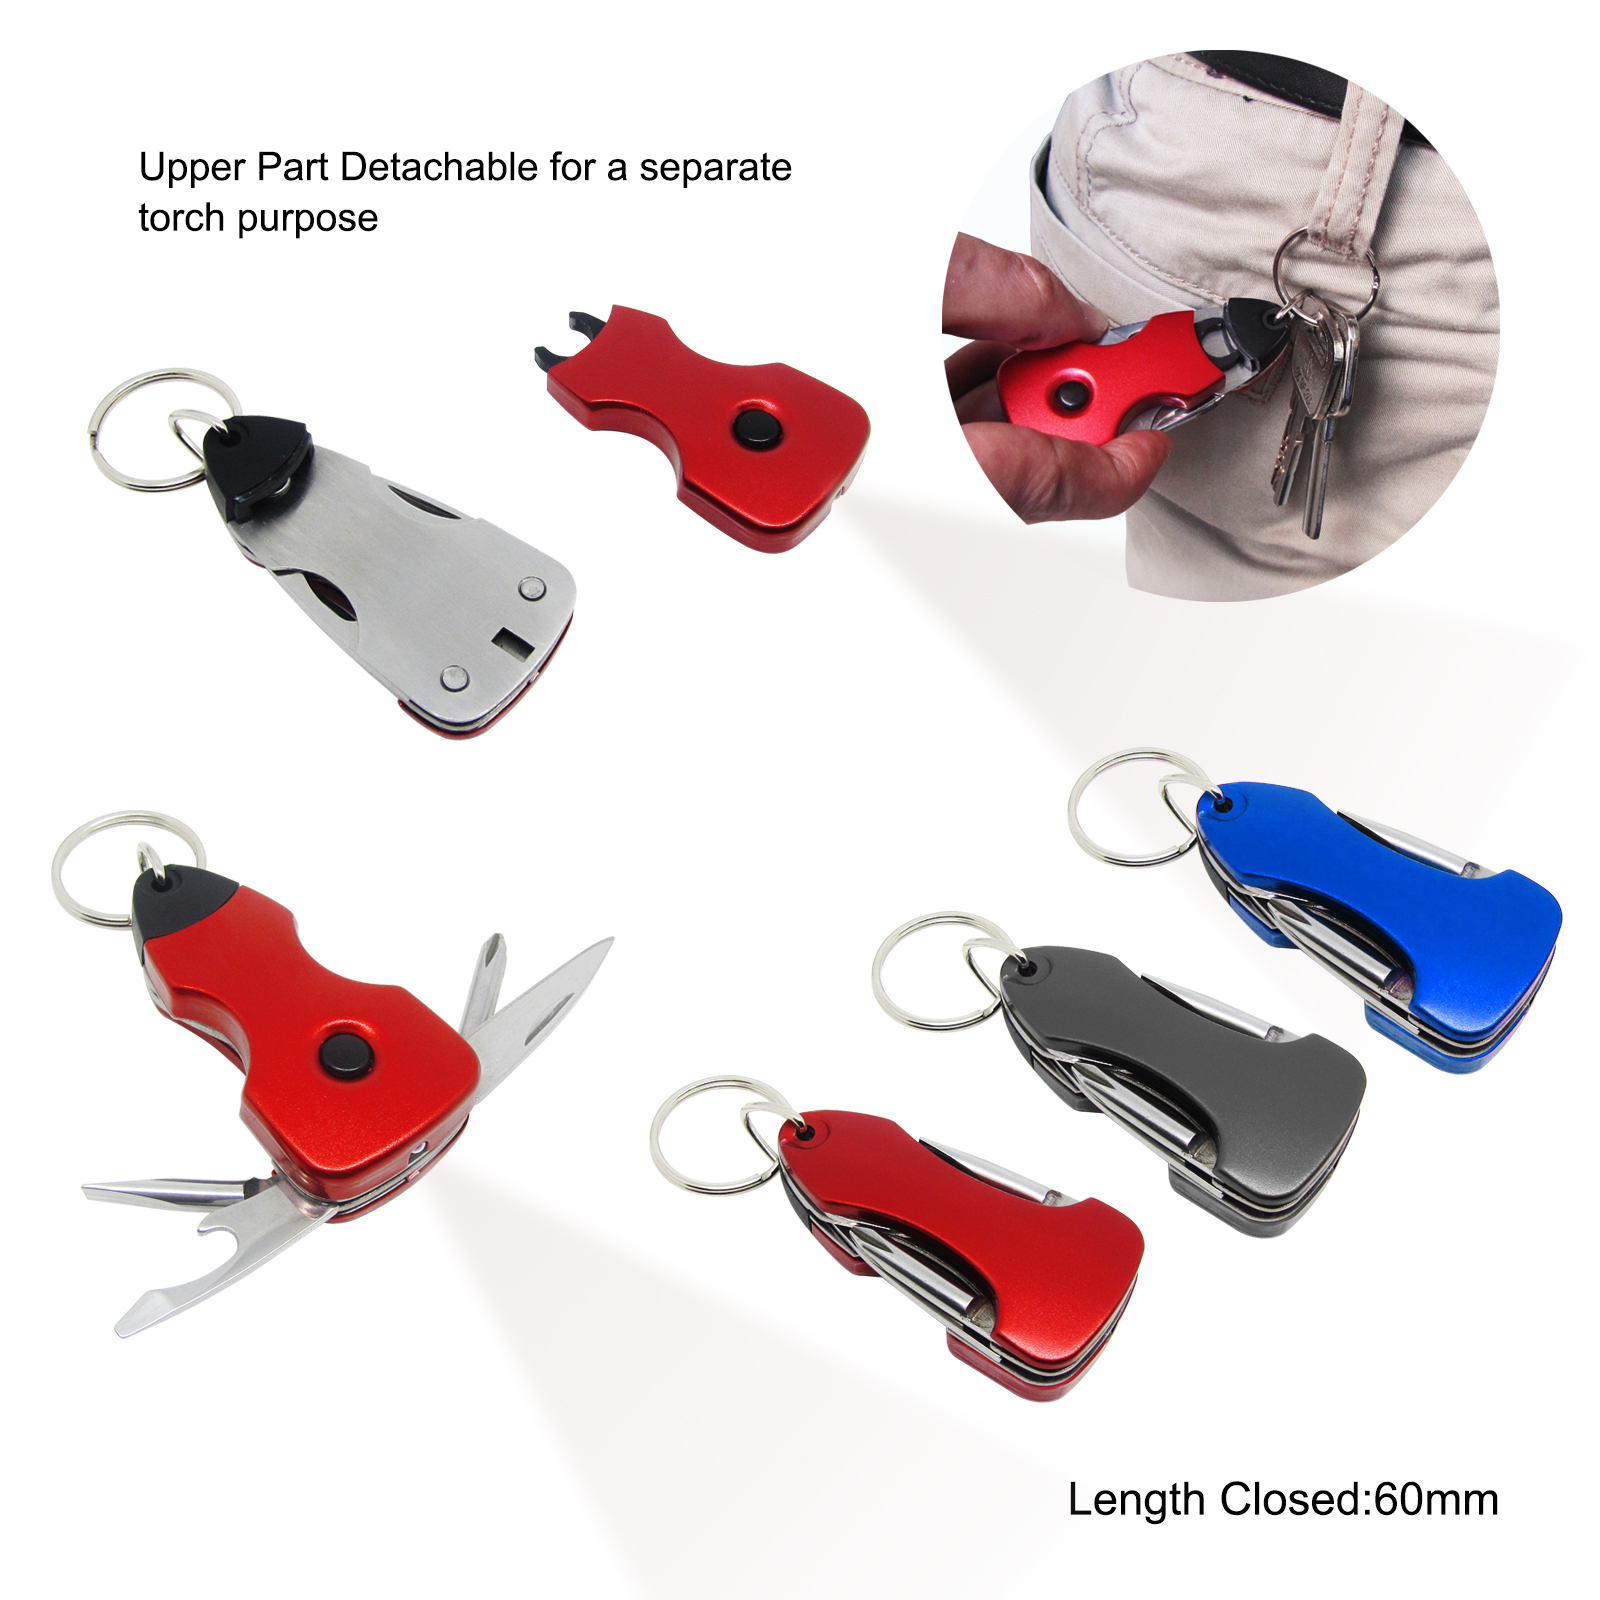 #6168 Multi-function Key Chain Tools with Detachable LED Torch 